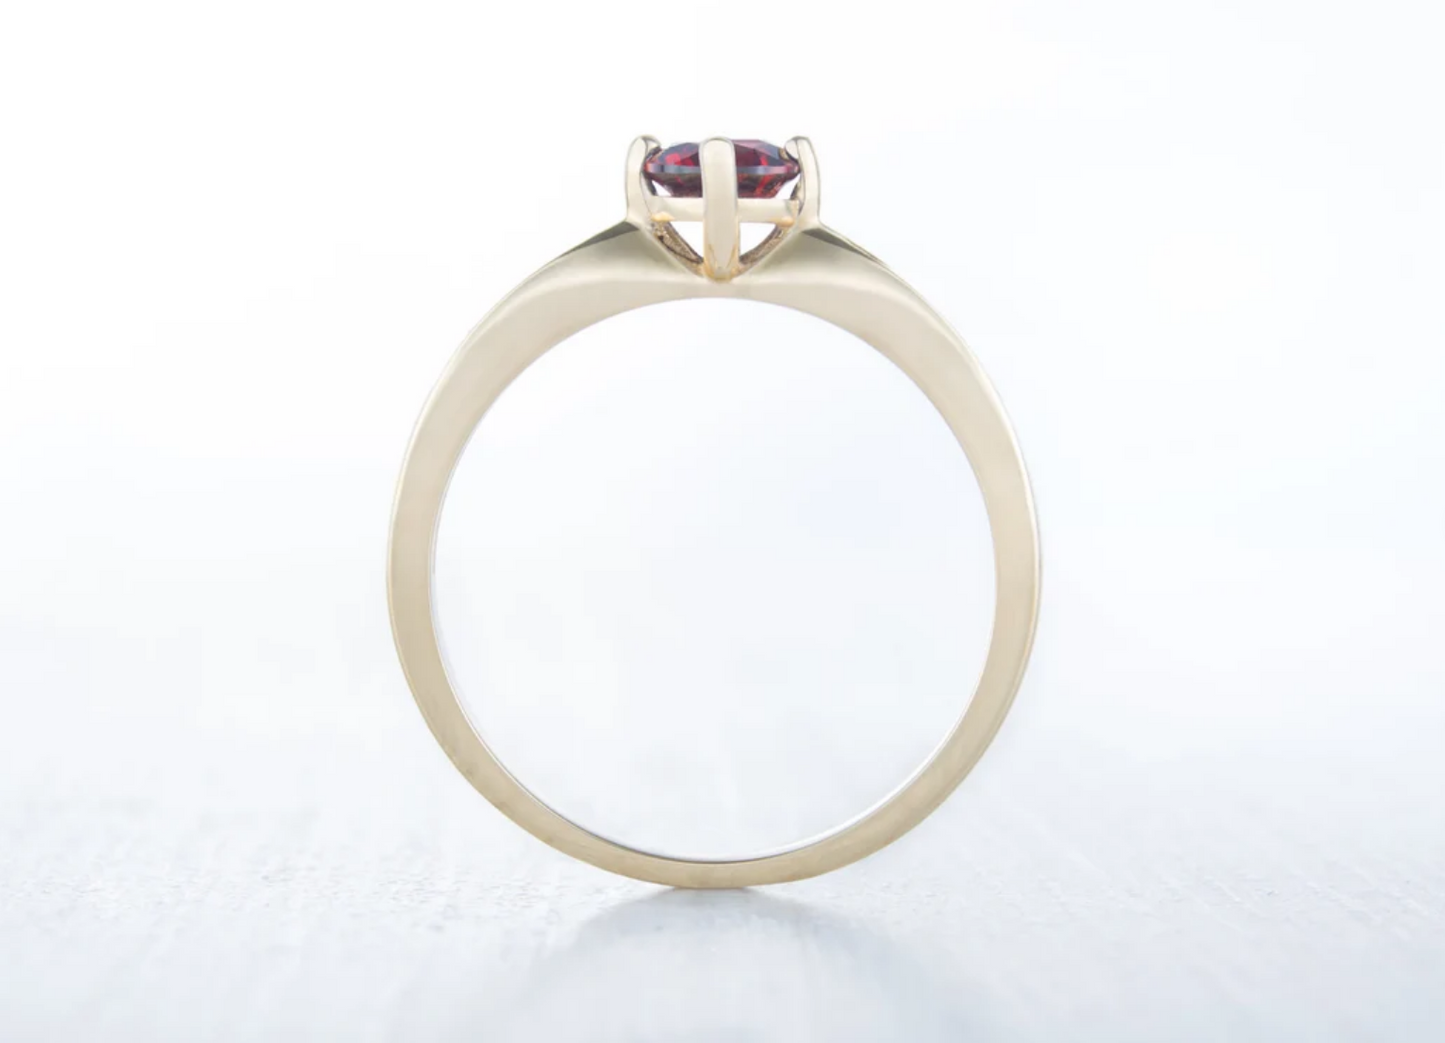 Size UK O / US 7 10K Solid Yellow Gold and Garnet Engagement ring.